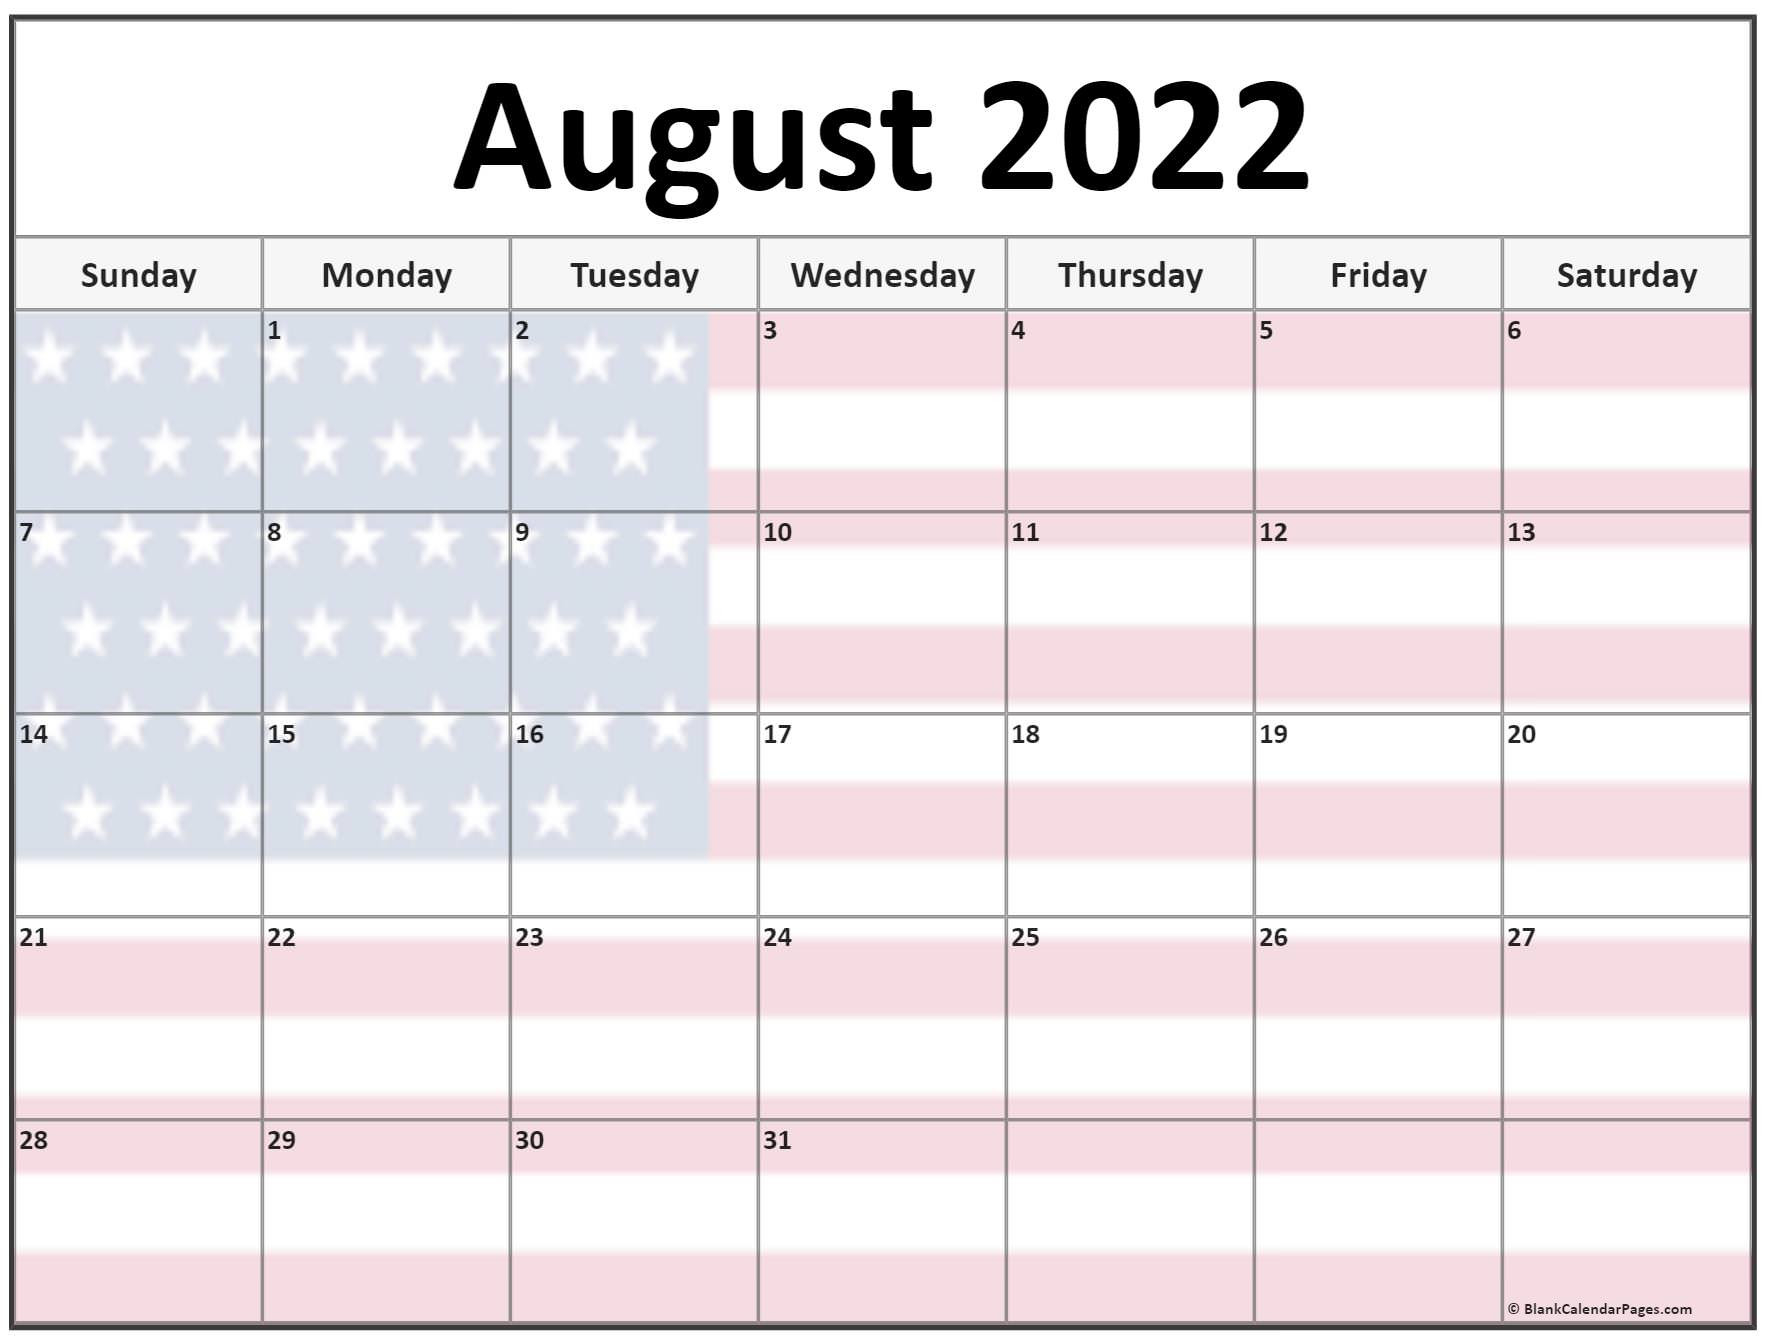 Collection Of August 2022 Photo Calendars With Image Filters.  August 2022 To July 2022 Calendar Printable